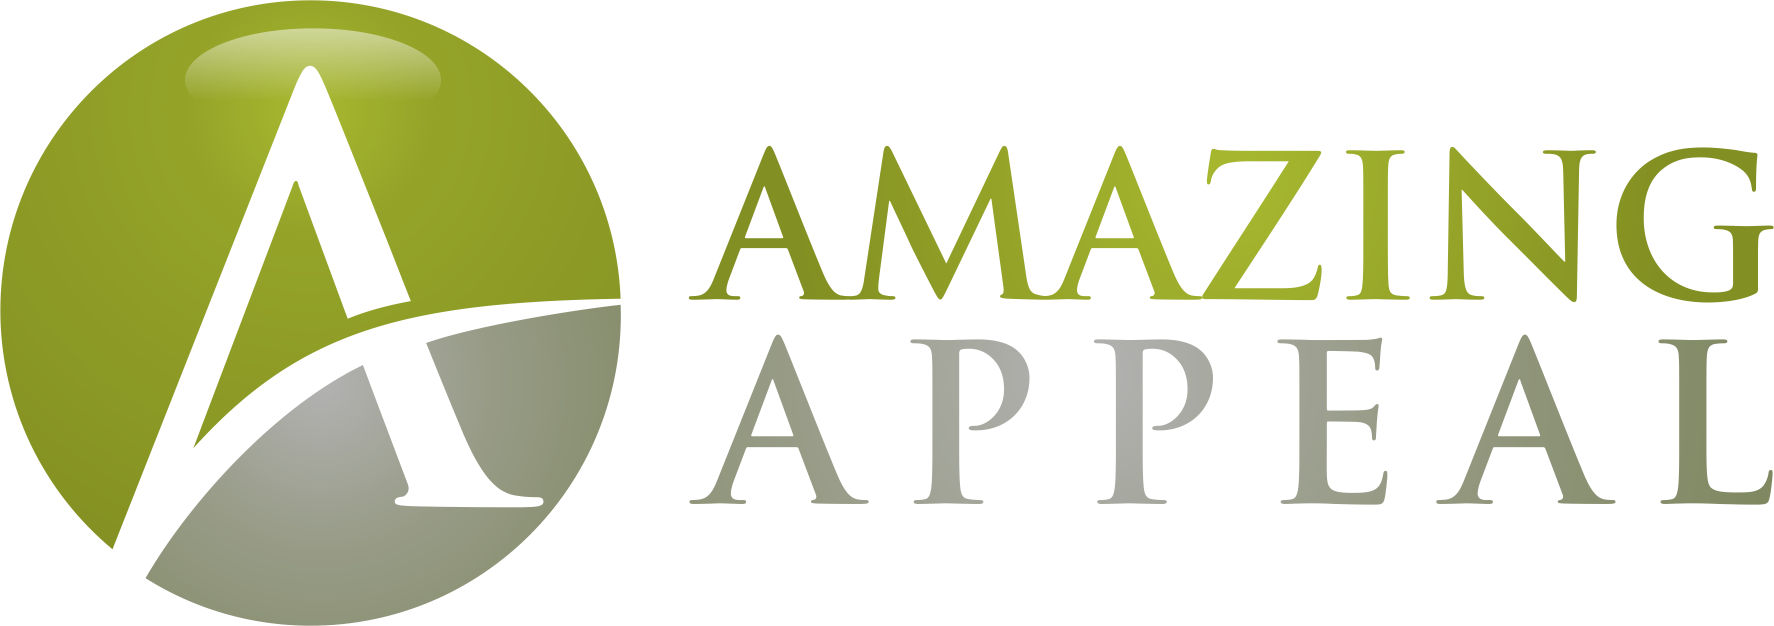 Amazing Appeal – Leadership Development and Podcasting Company